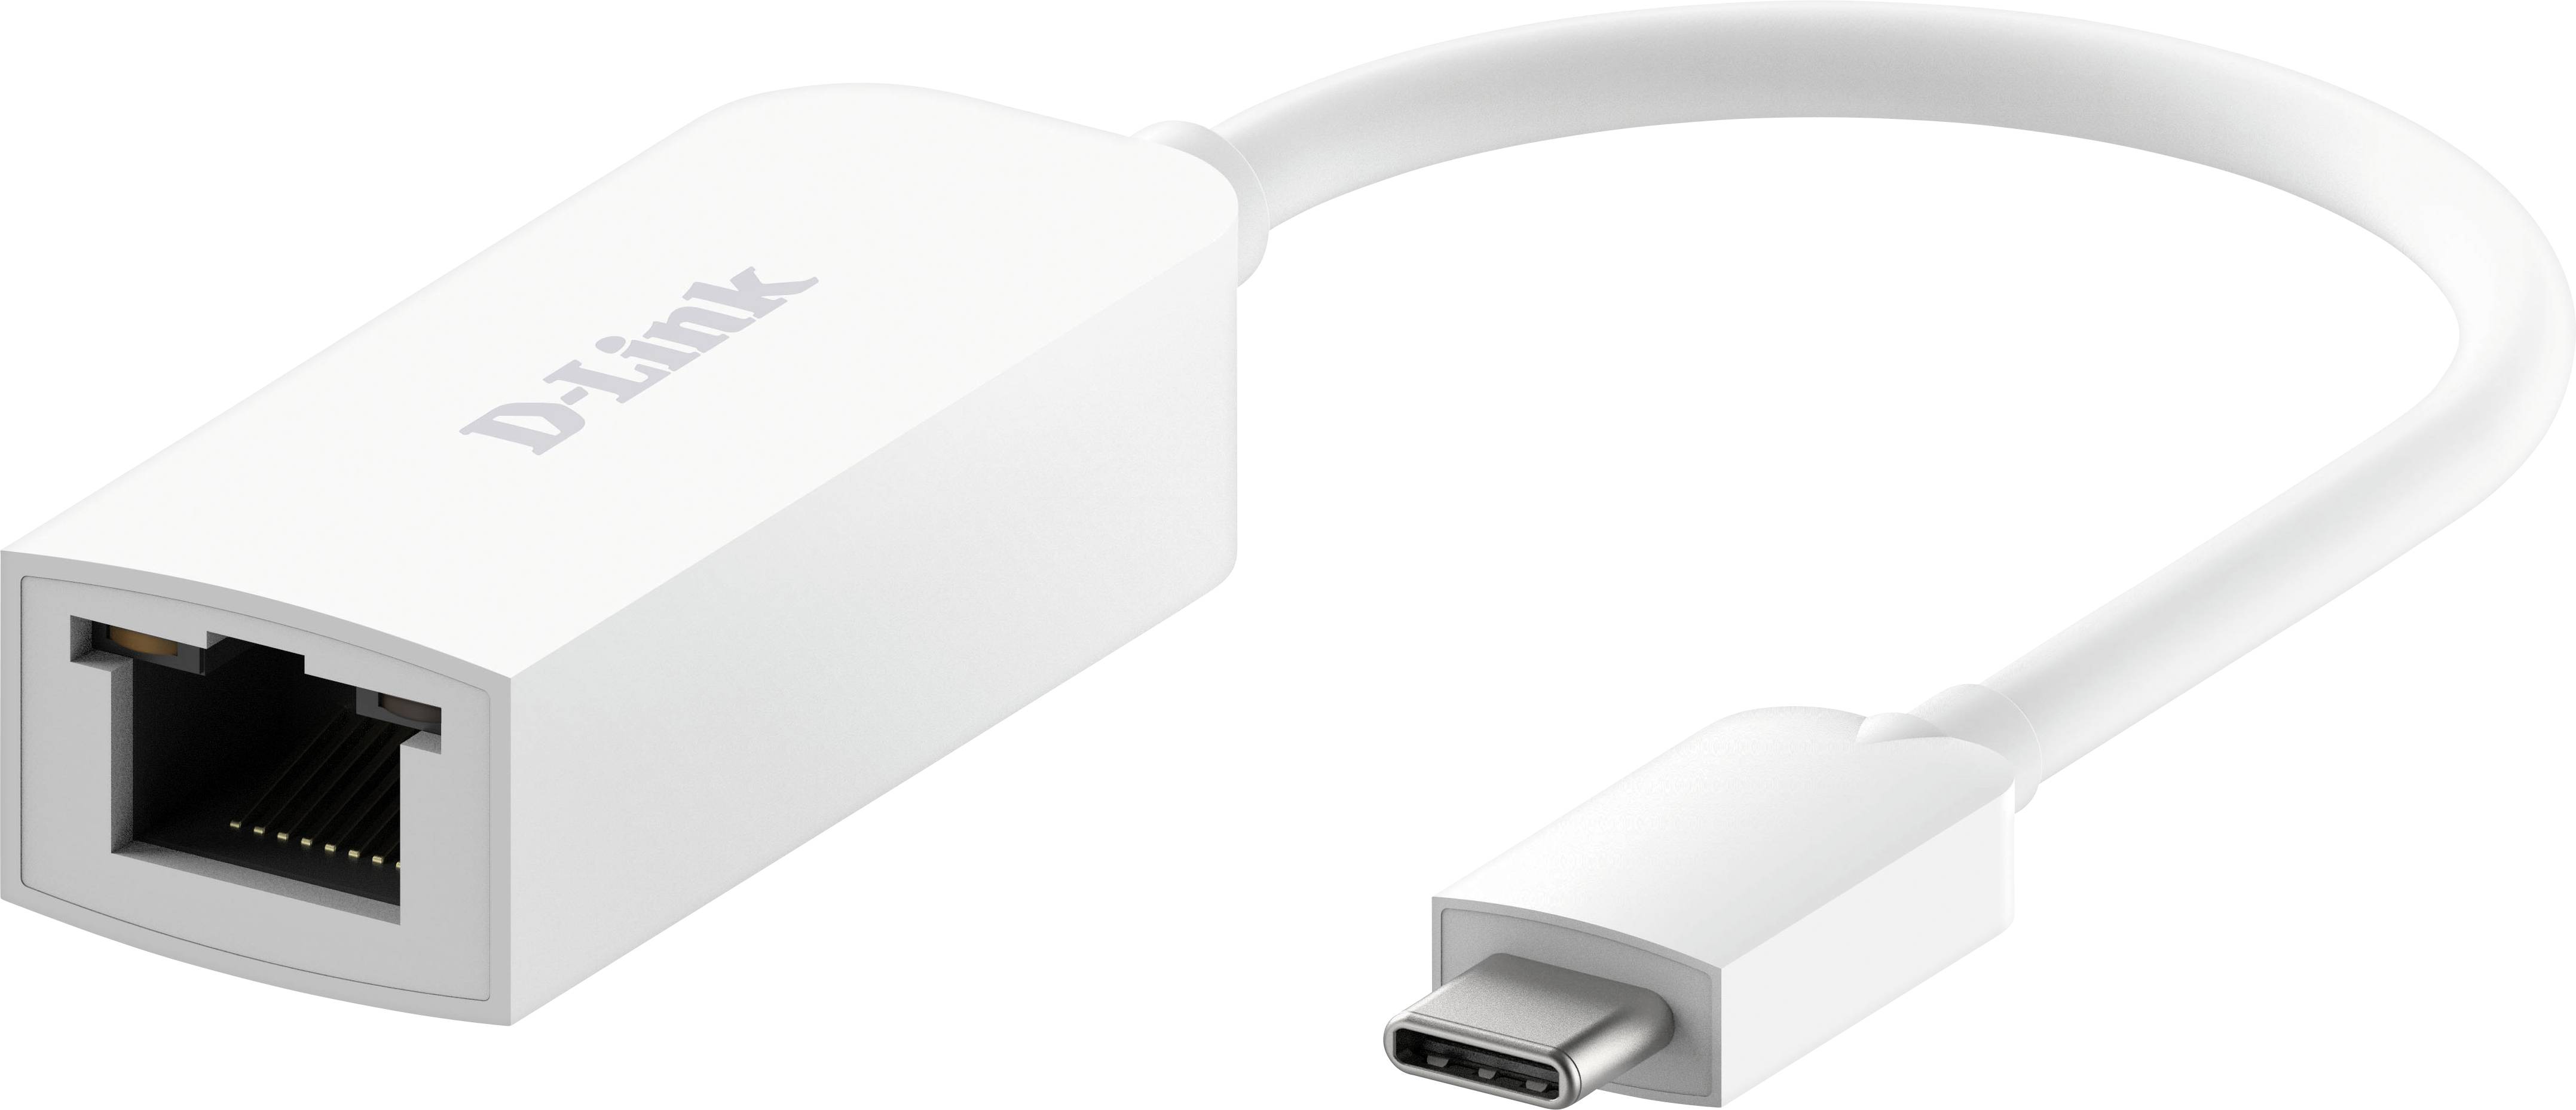 D-LINK USB-C to 2.5G Ethernet Adapter